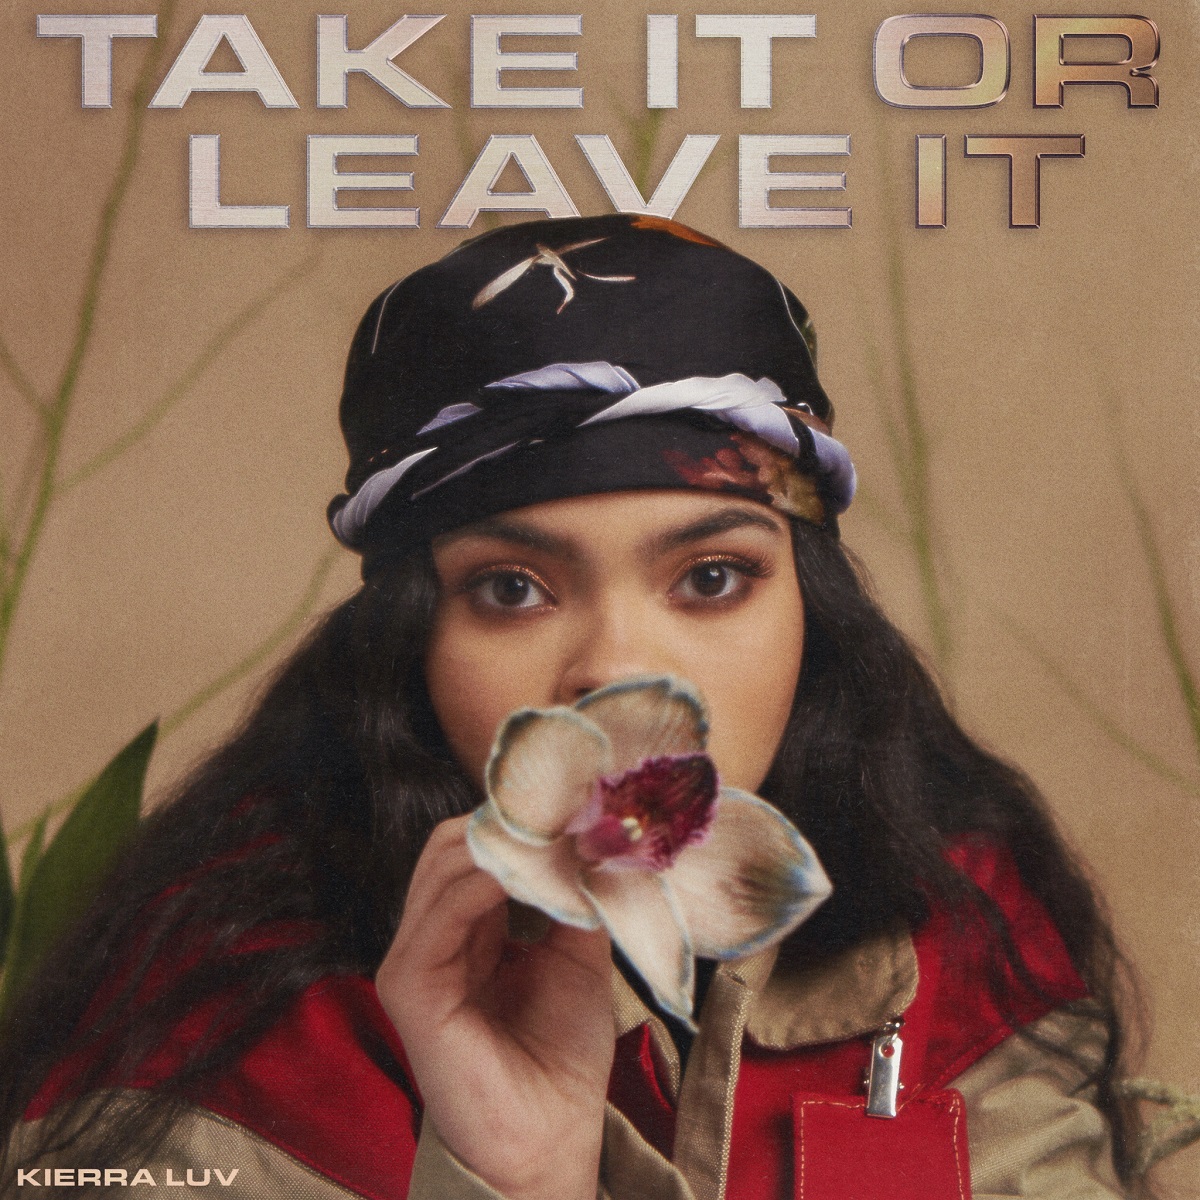 Kierra Luv drops her "Take It or Leave It" debut mixtape, on June 19. A week before the mixtape release, Kierra Luv drops "Worth It All," the new single from the project.